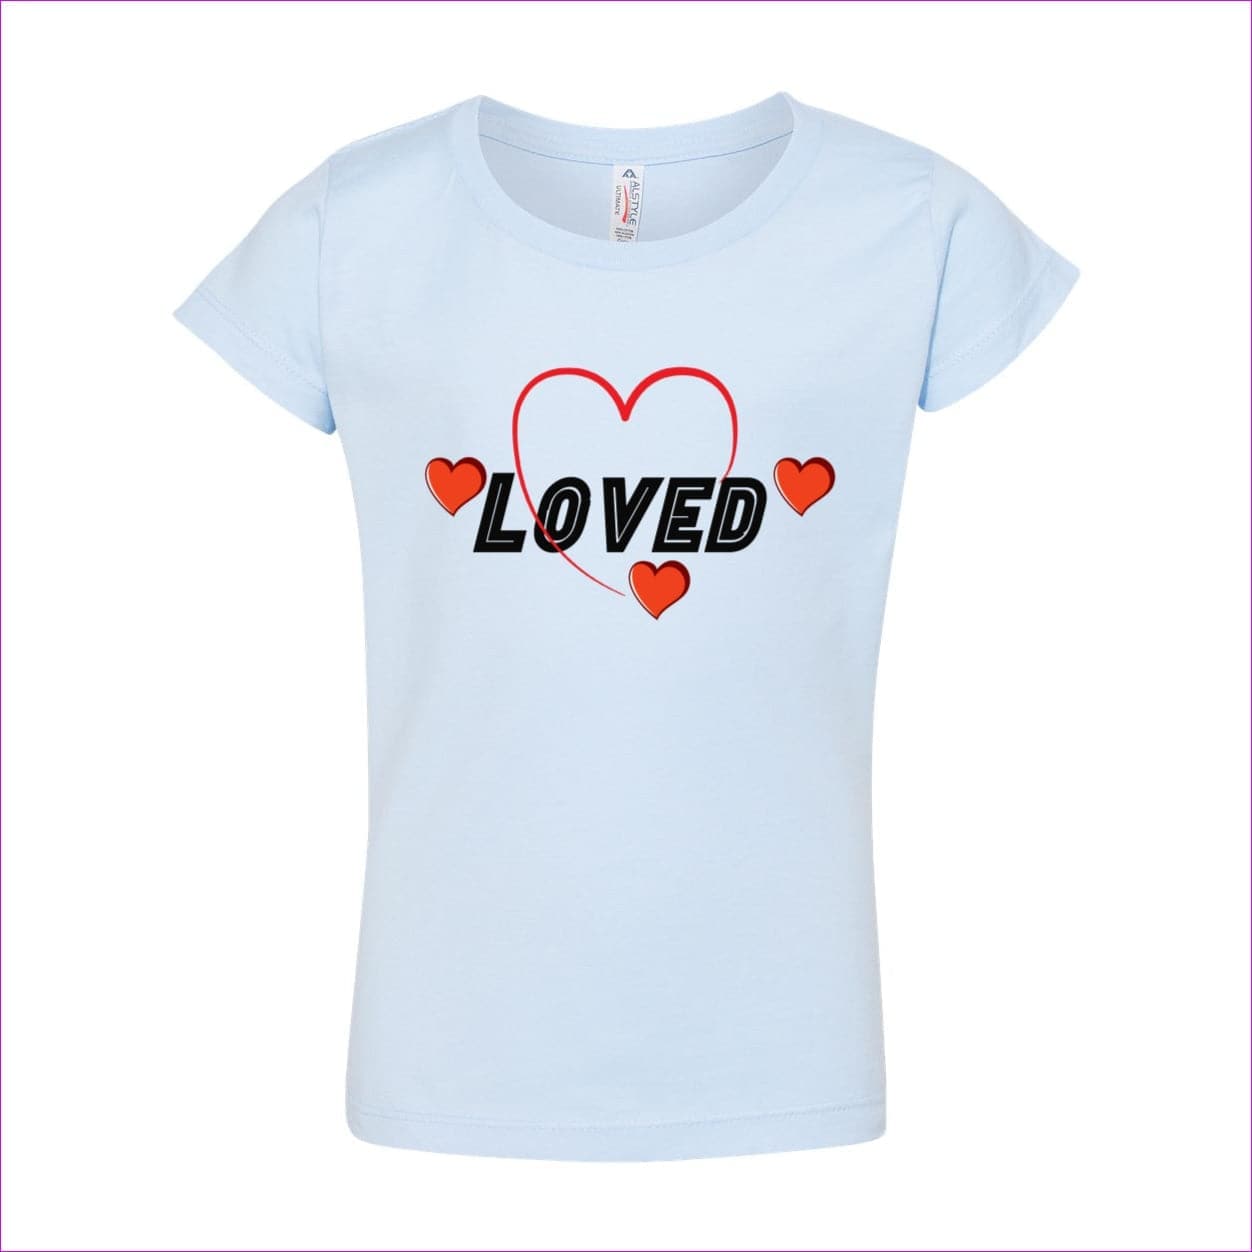 Powder Blue Loved Girls’ Ultimate T-Shirt - kid's t-shirts at TFC&H Co.